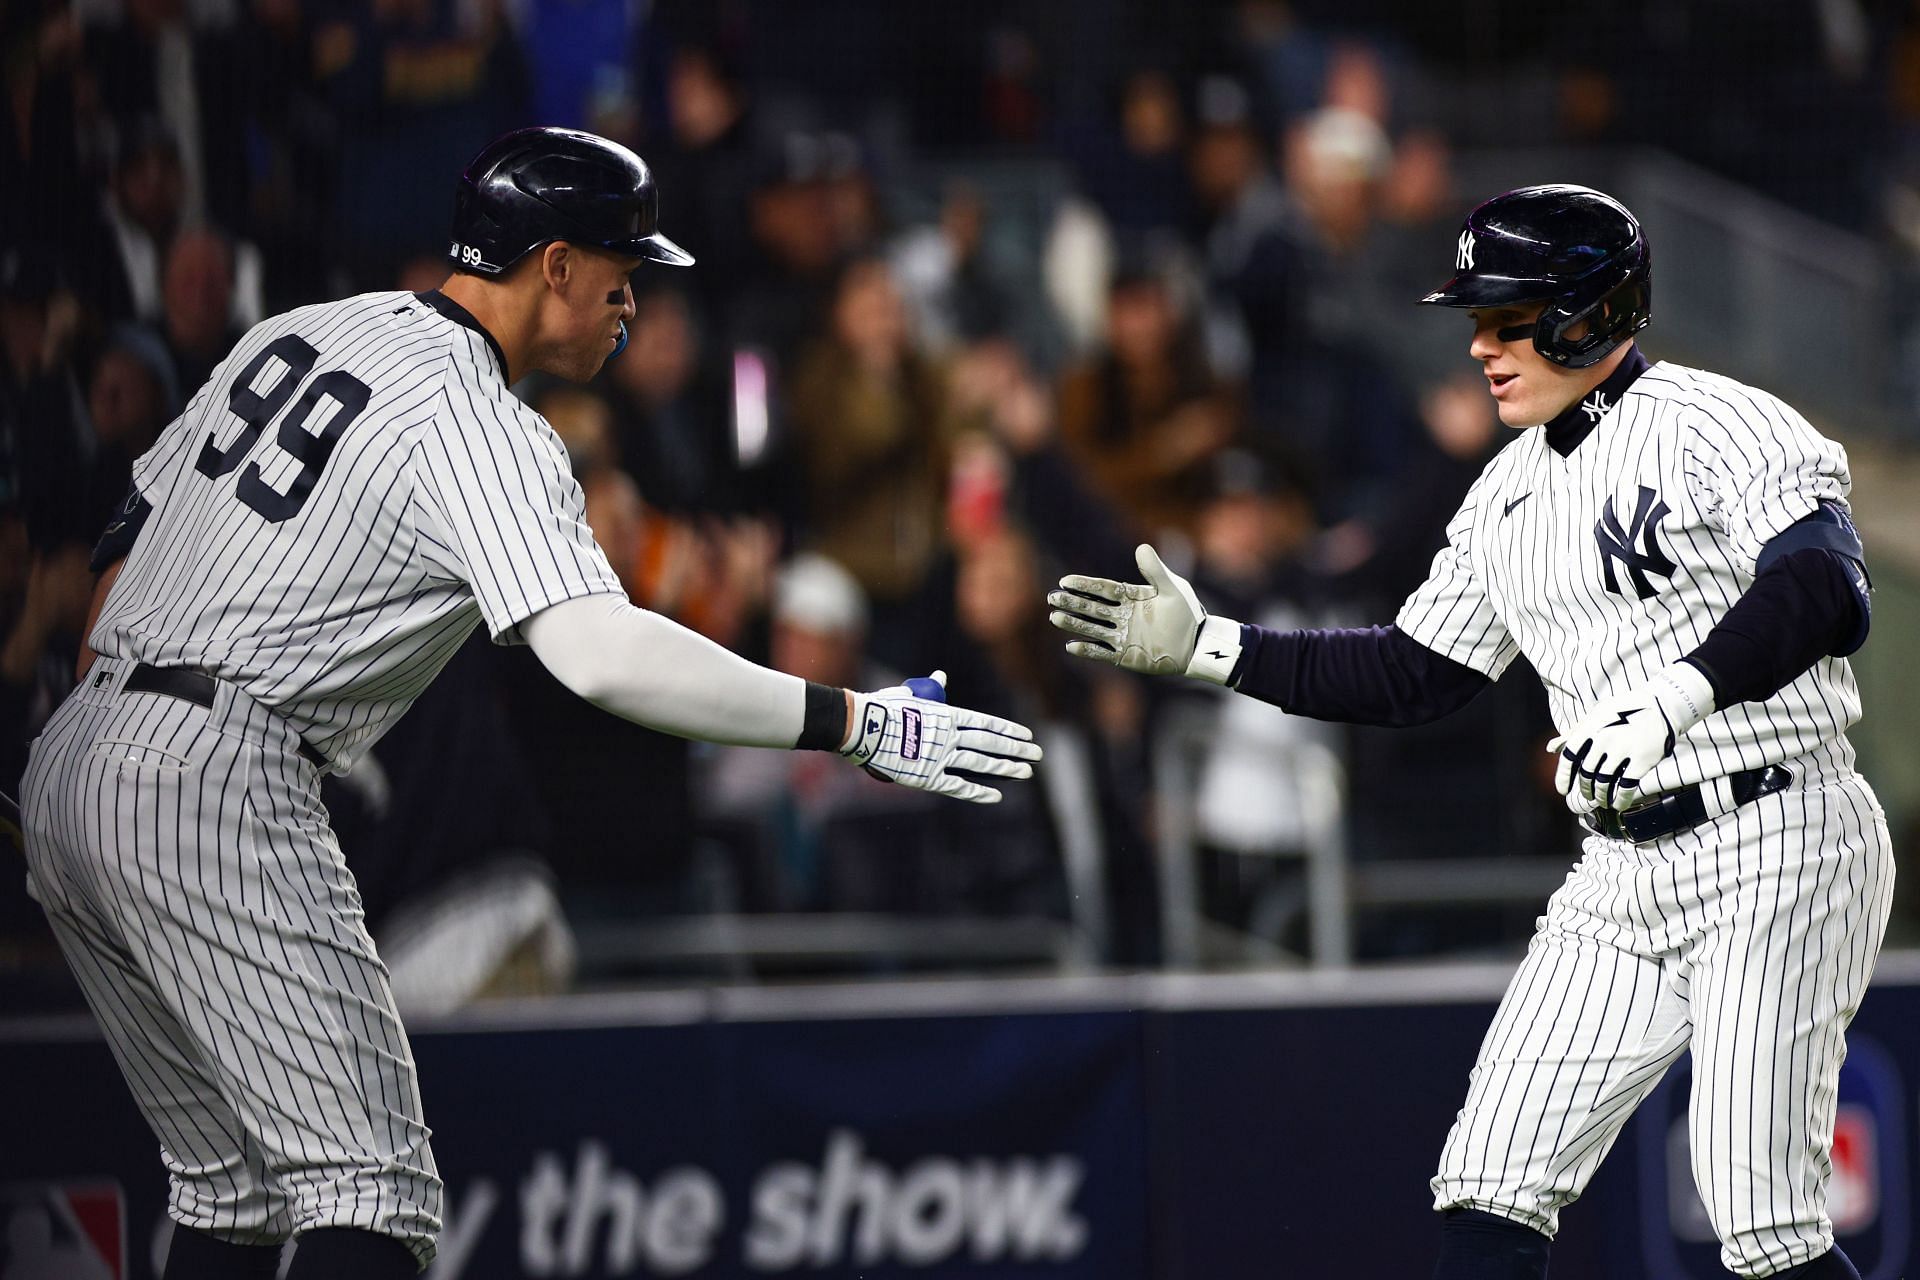 New York Yankees 2019 Opening Day Highlights  HD  YouTube